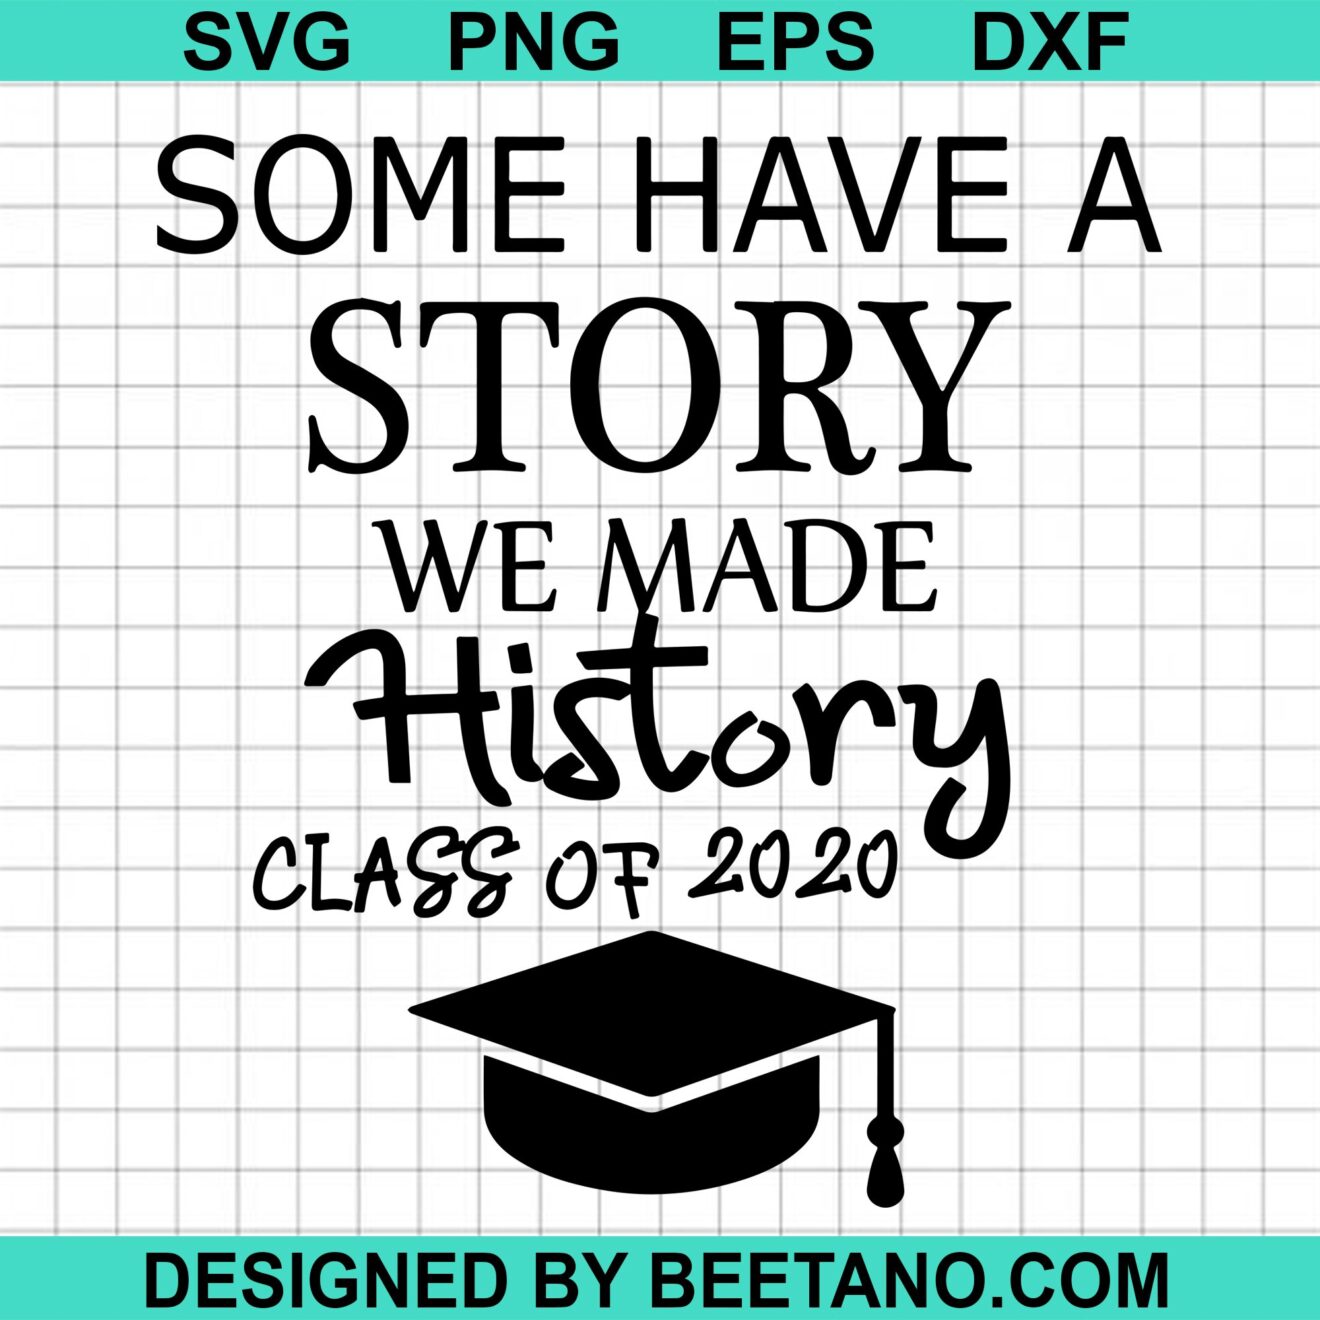 We made history class of 2020 svg cut files for cricut to make handmade ...